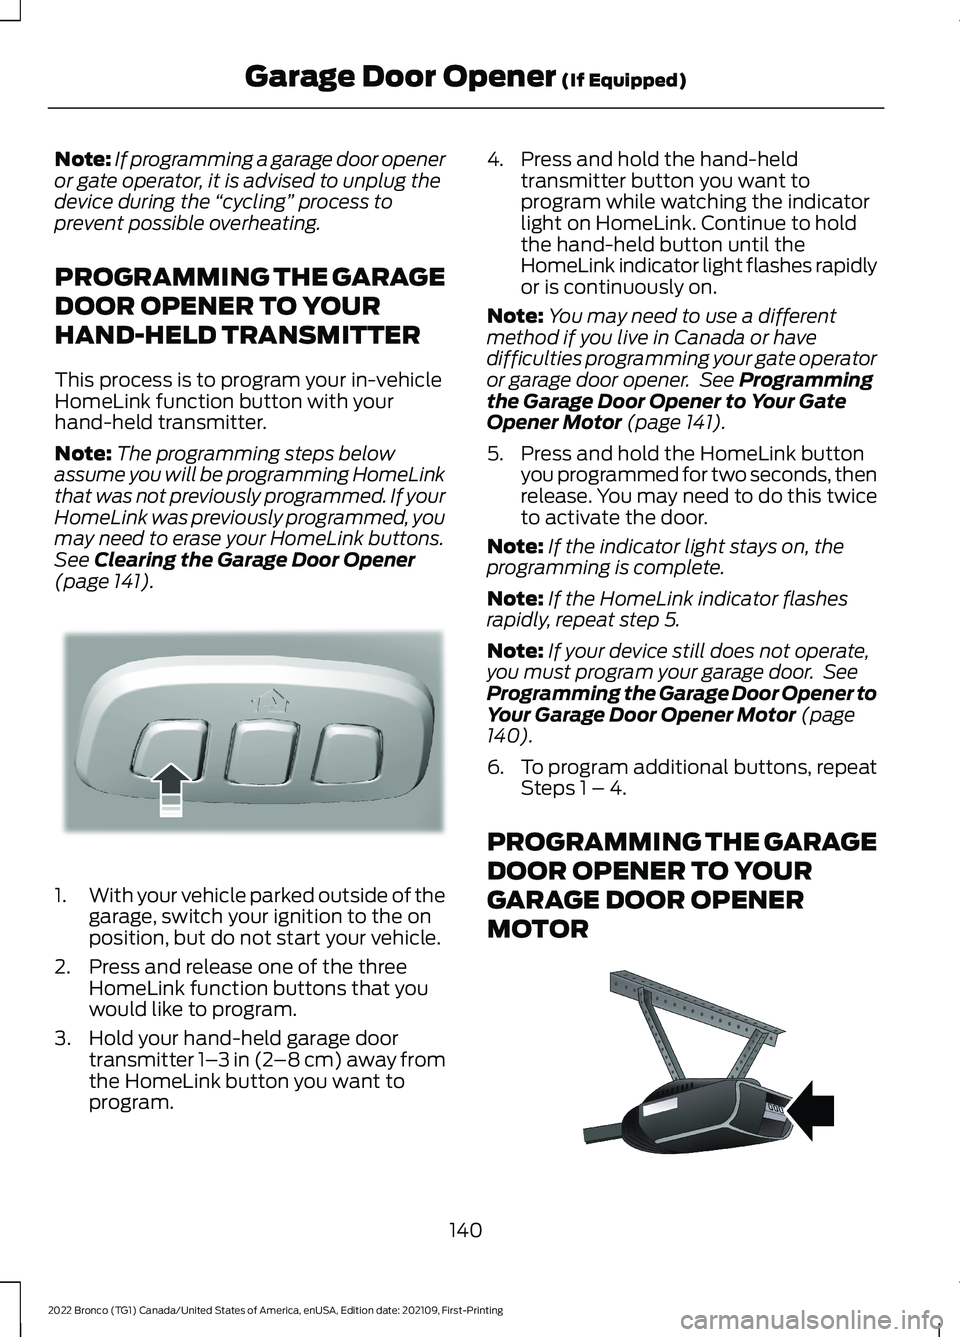 FORD BRONCO 2022 Owners Guide Note:If programming a garage door openeror gate operator, it is advised to unplug thedevice during the “cycling” process toprevent possible overheating.
PROGRAMMING THE GARAGE
DOOR OPENER TO YOUR
